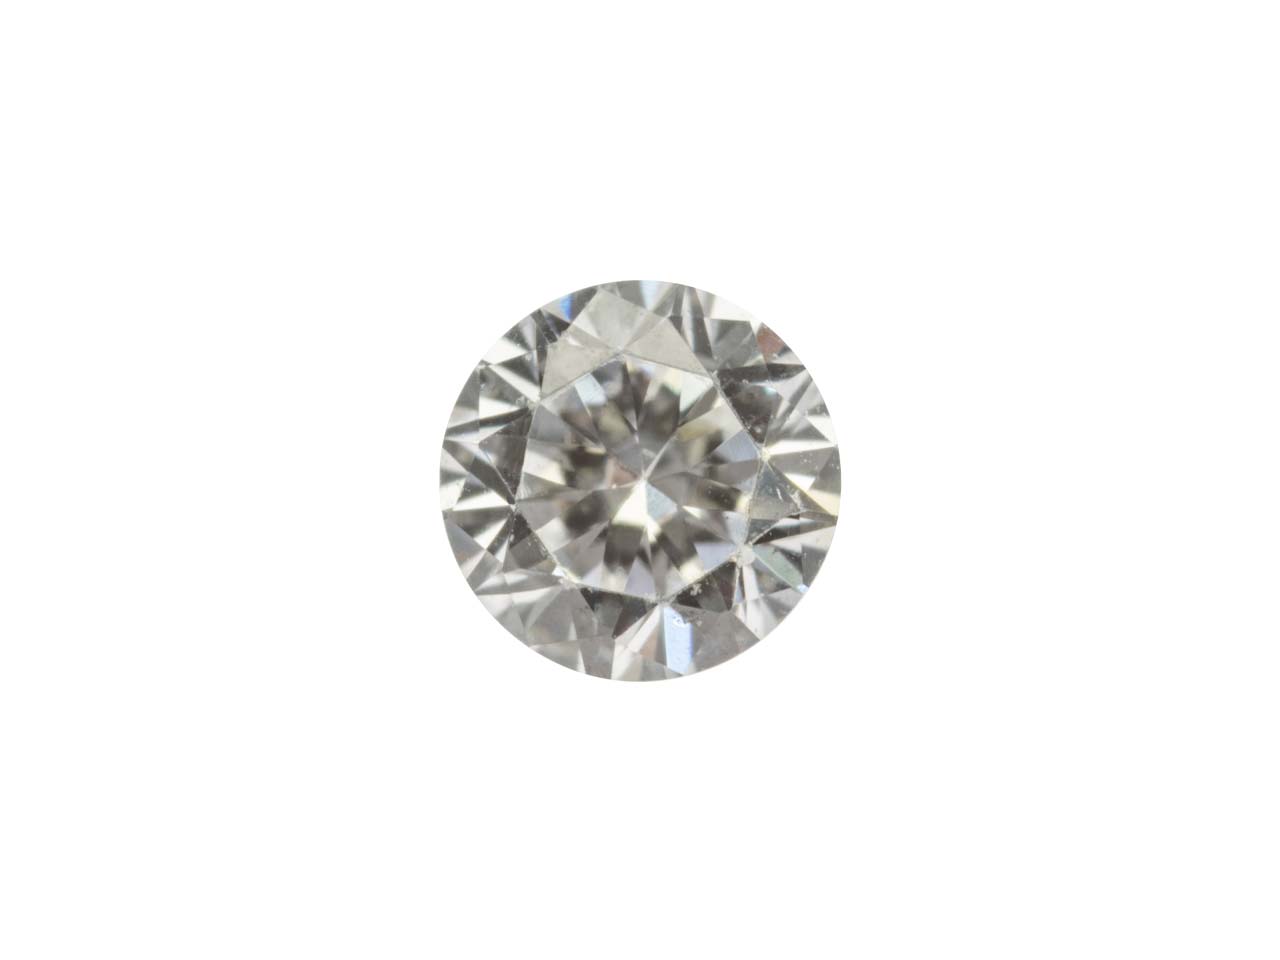 Diamond, Lab Grown, Round, D/VS, 1.3mm Questions & Answers